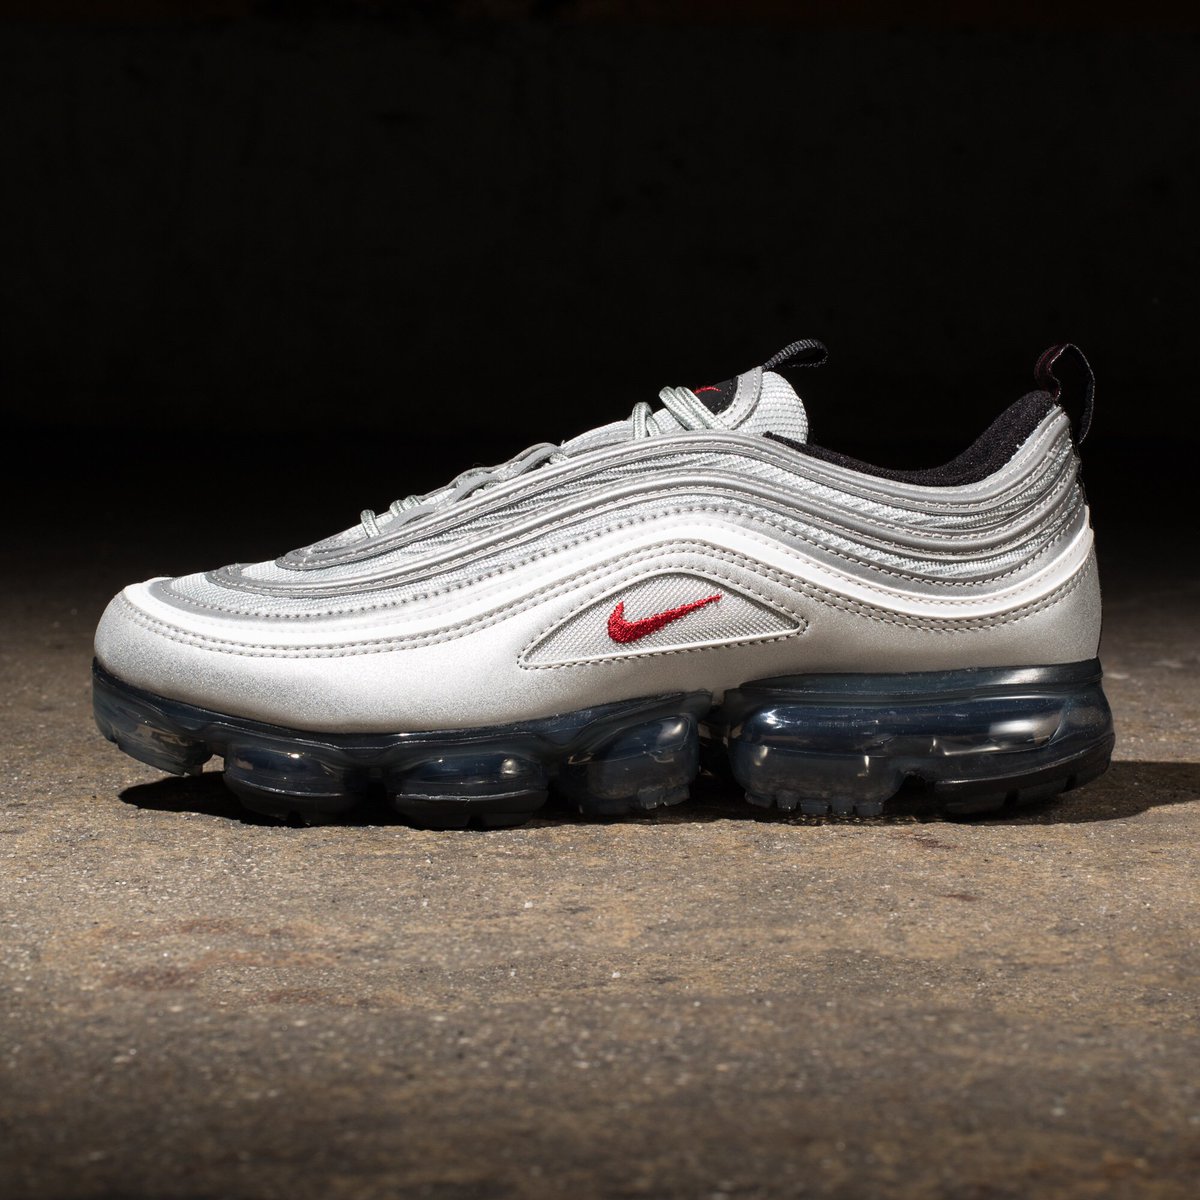 Air VaporMax 97 Atmosphere Gray University Red GS Excellent like